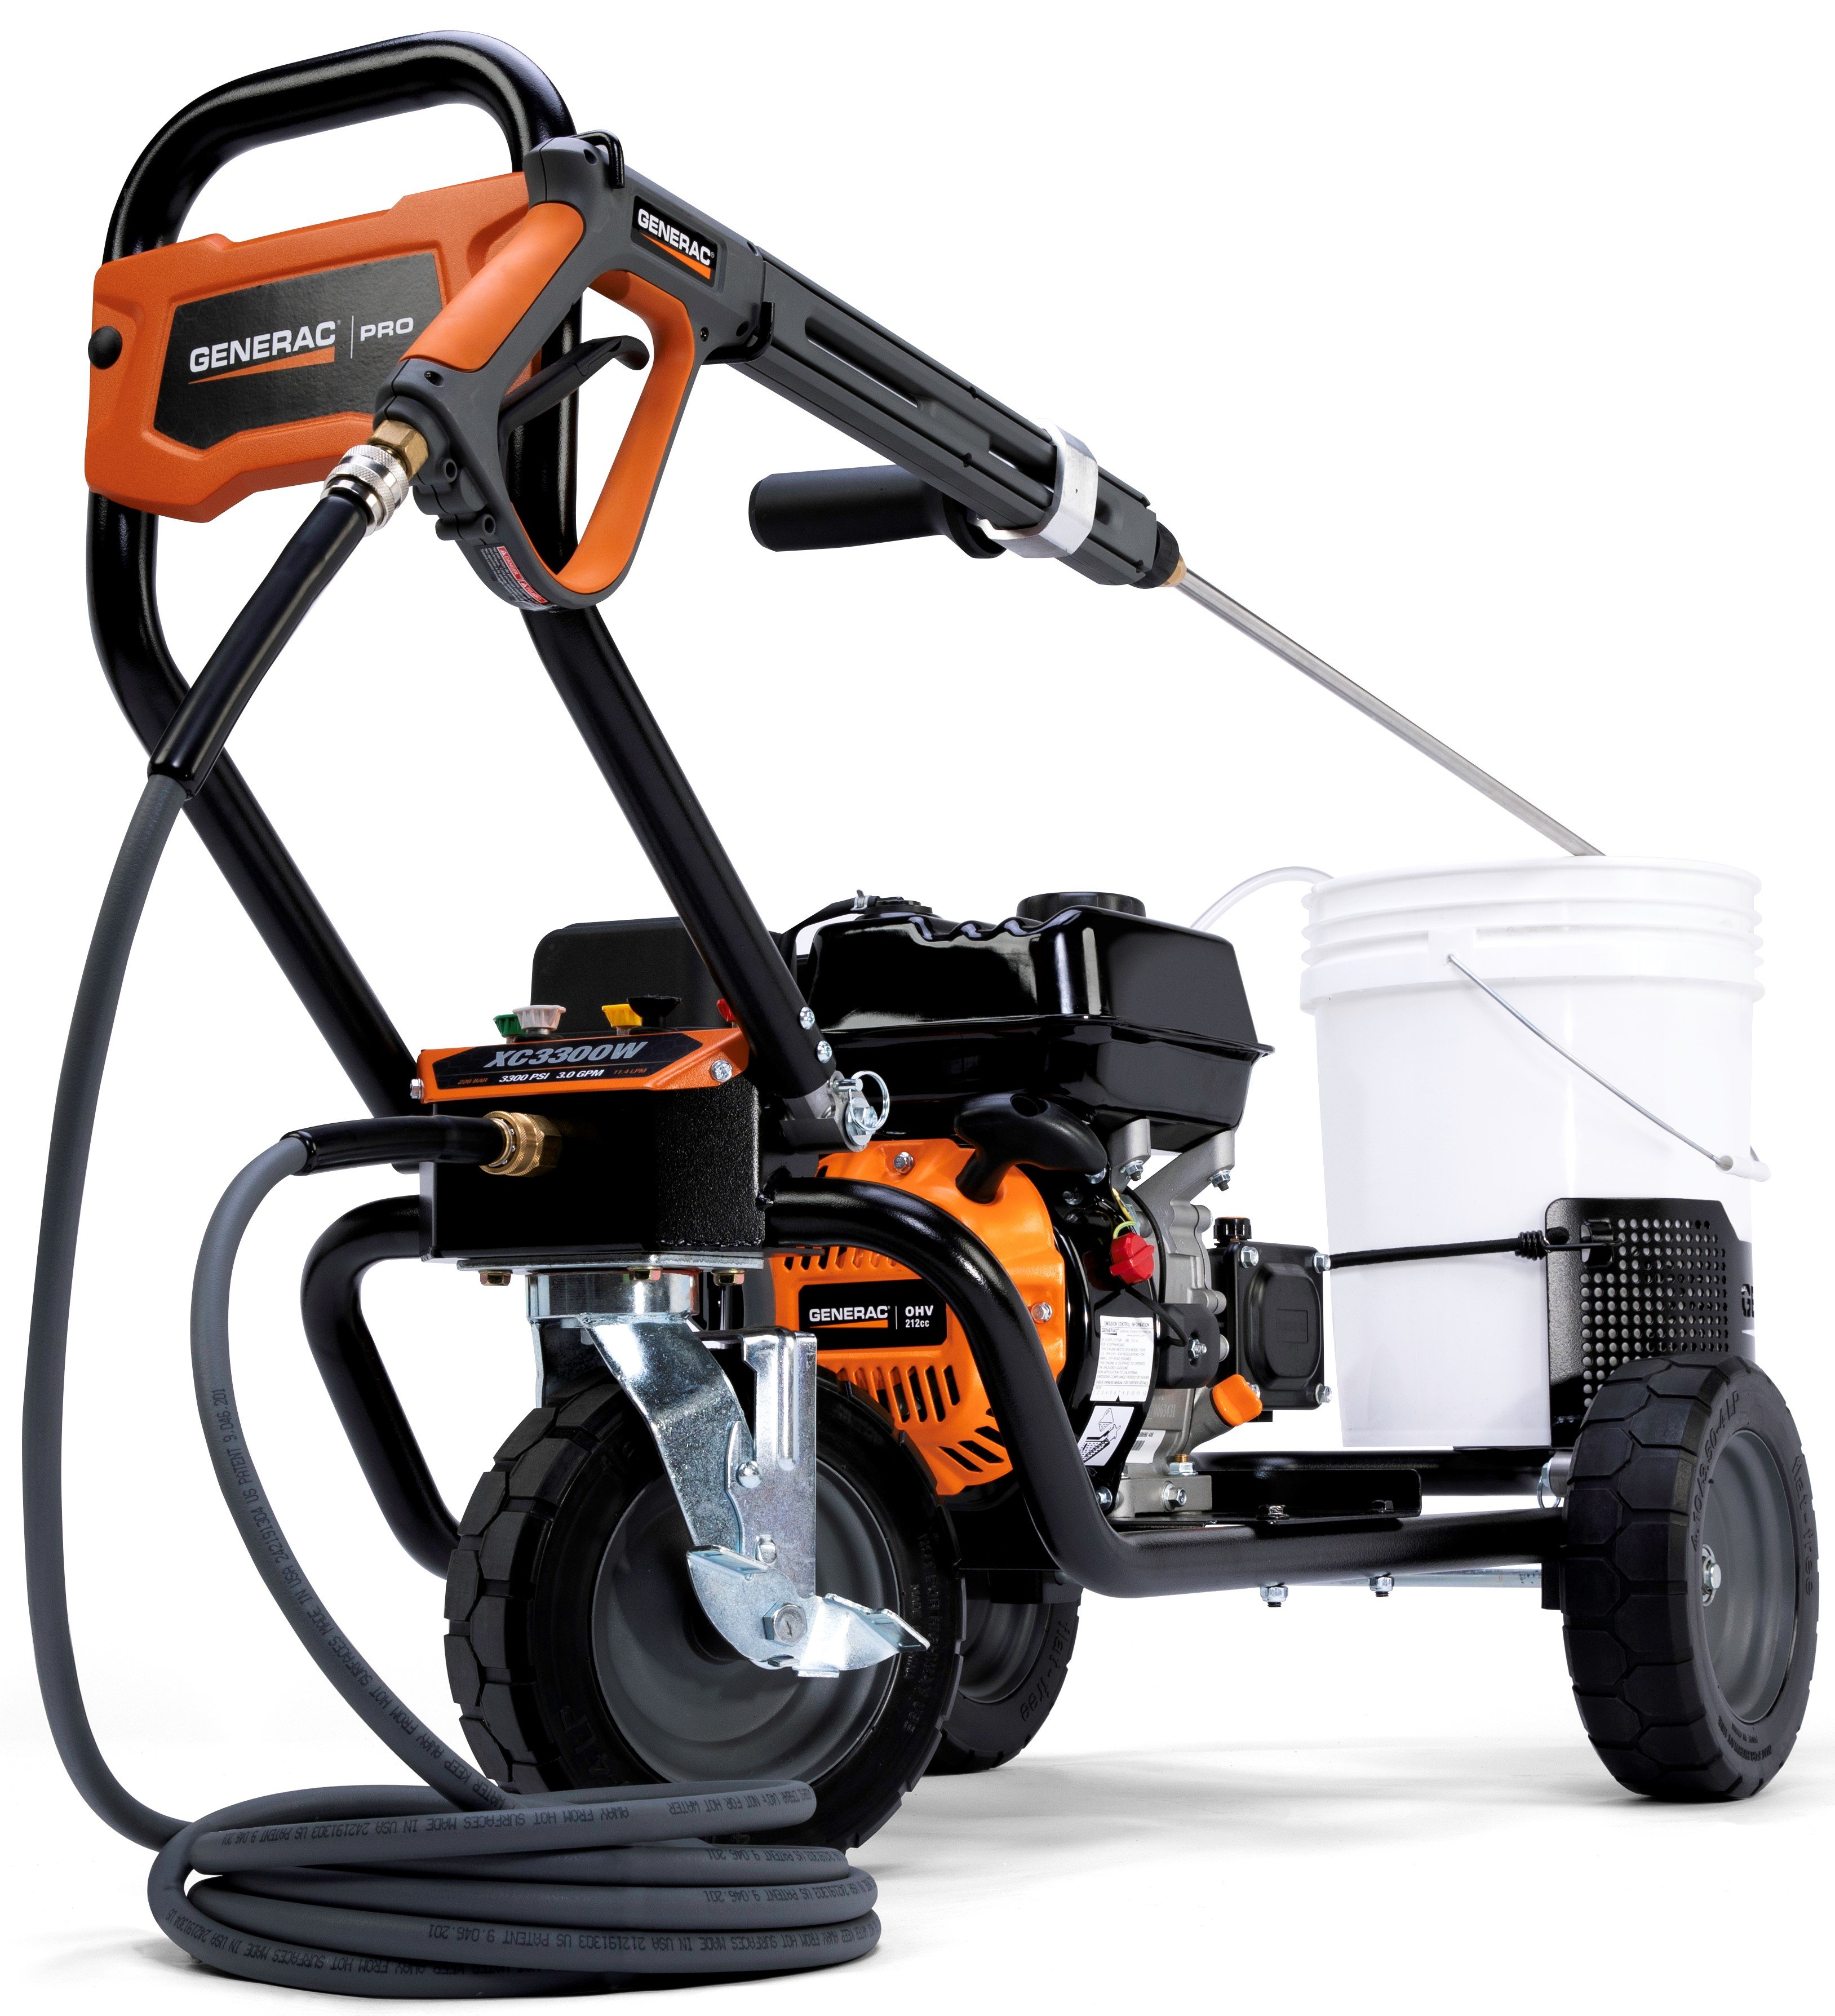 Pressure Washer 3300PSI 3.0GPM Product Image